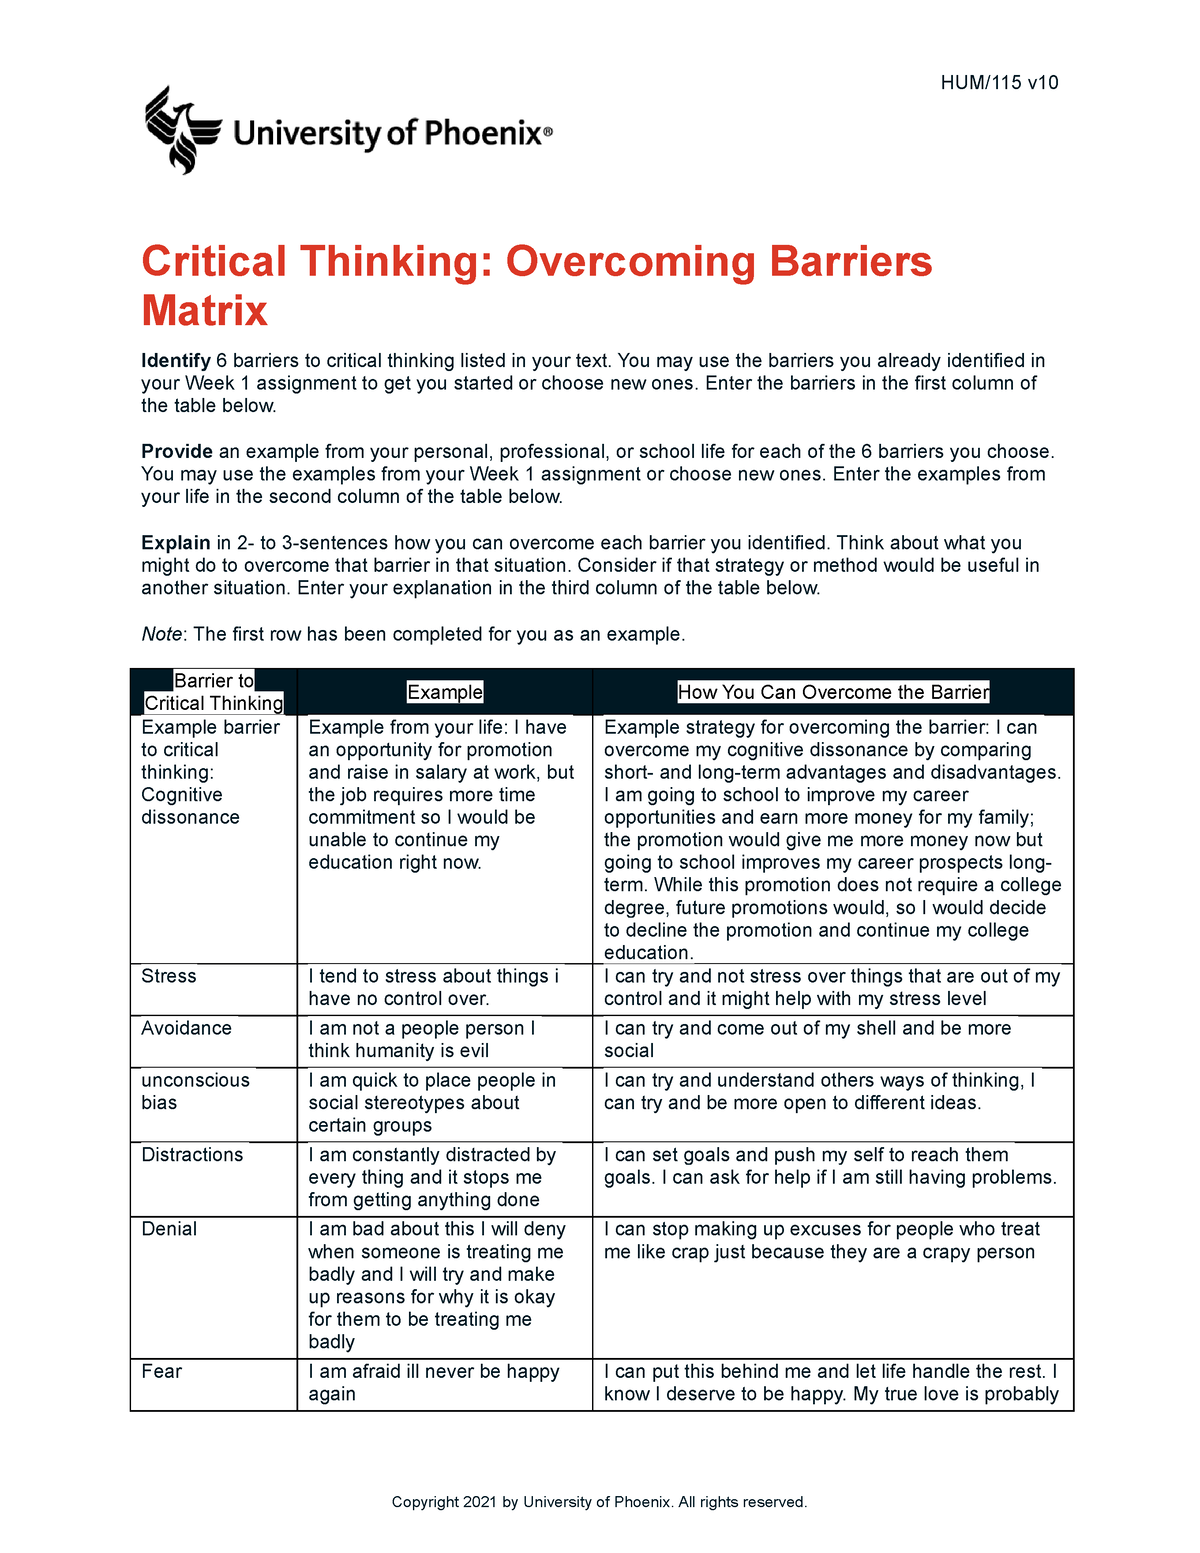 critical thinking overcoming barriers